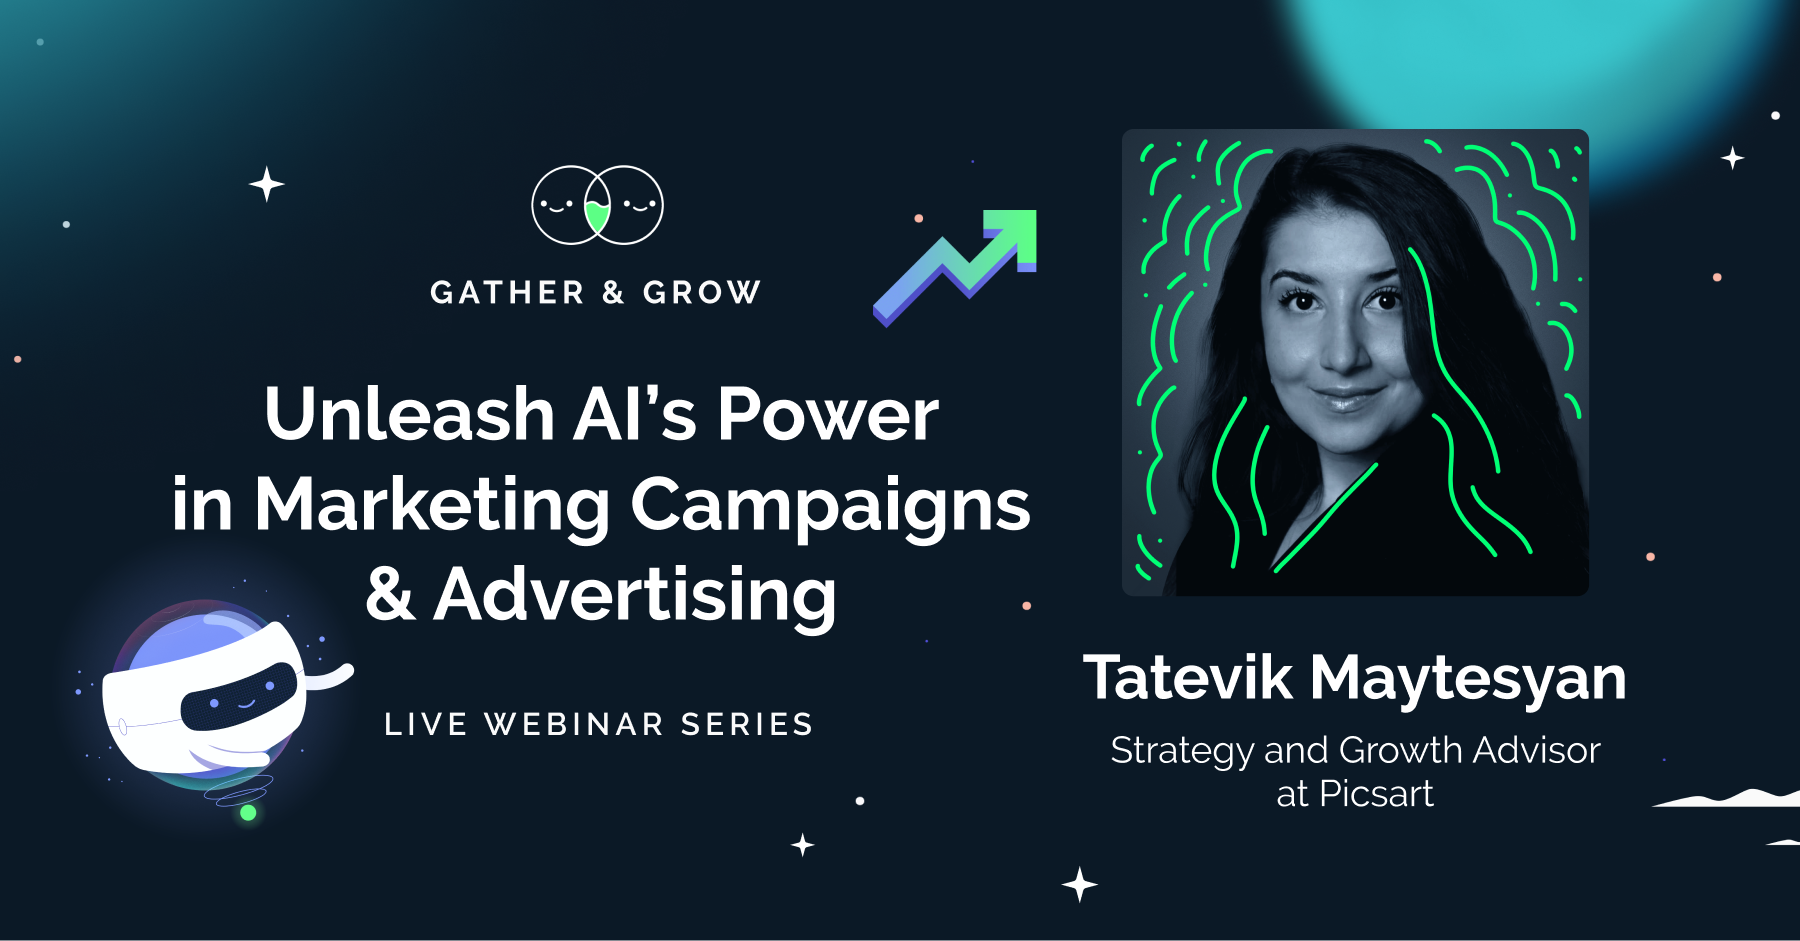 Unleash AI’s Power in Marketing Campaigns & Advertising